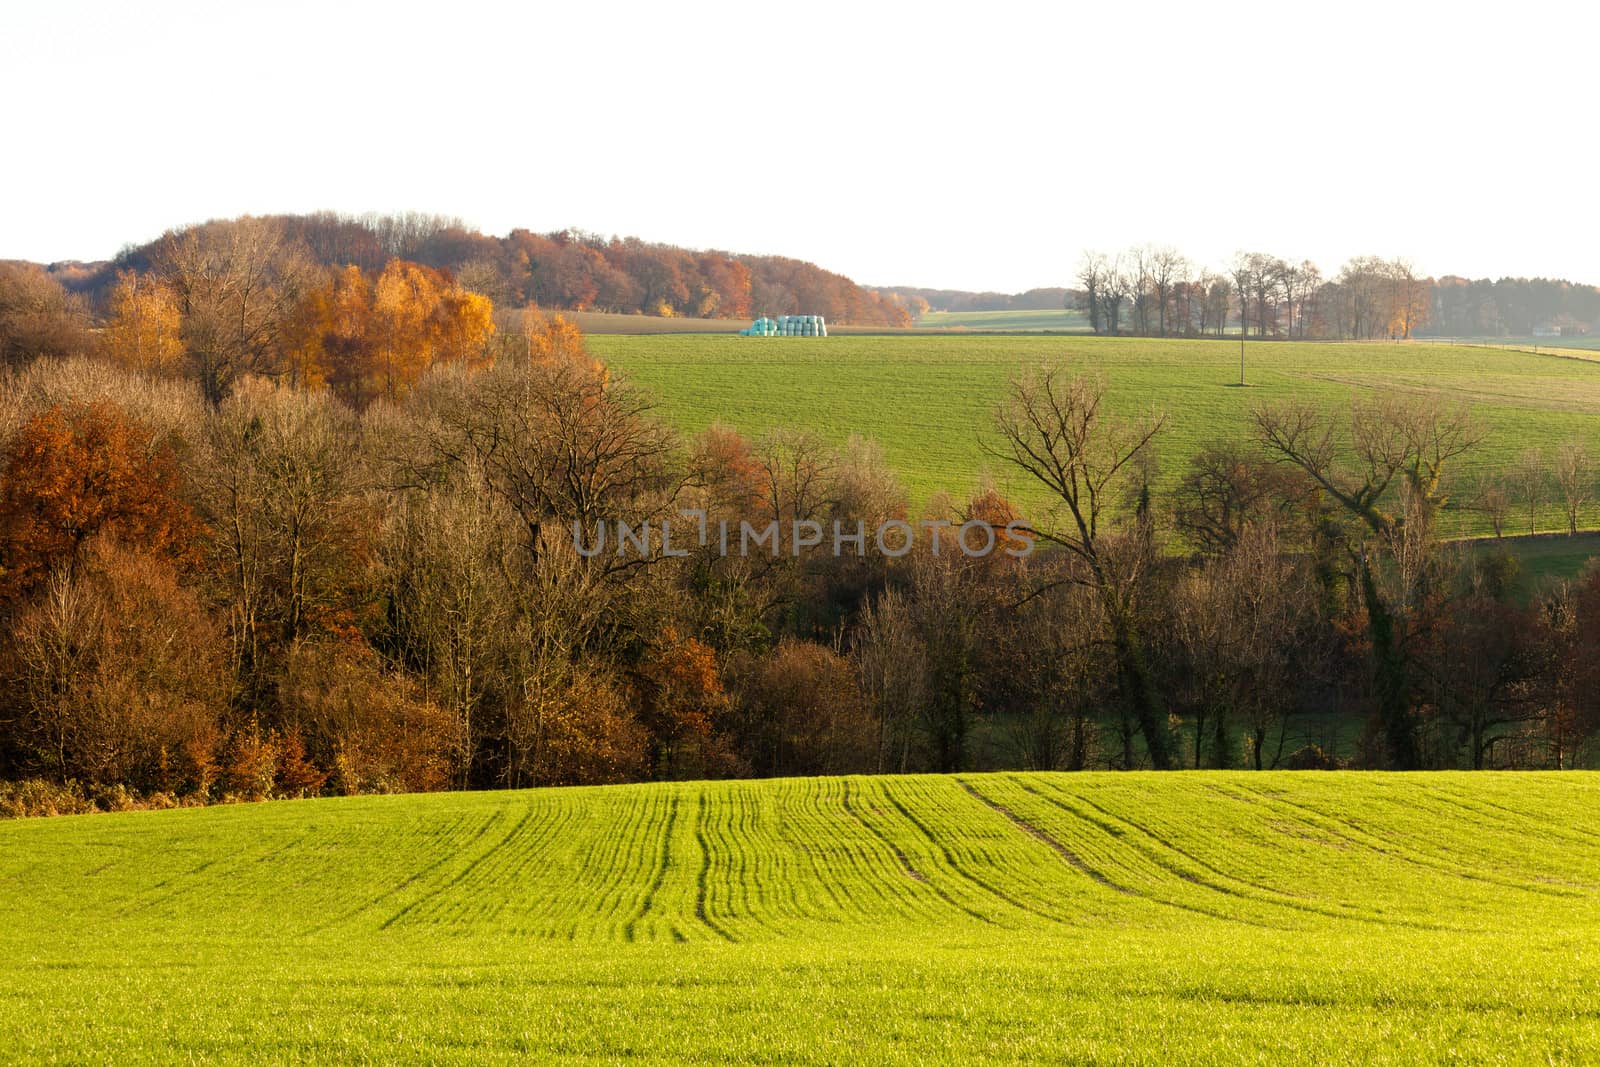 Gently rolling landscape of farmland with ploughed fields copses of trees and shallow valleys shrouded in a fine mist in evening light near Duesseldorf Germany Europe